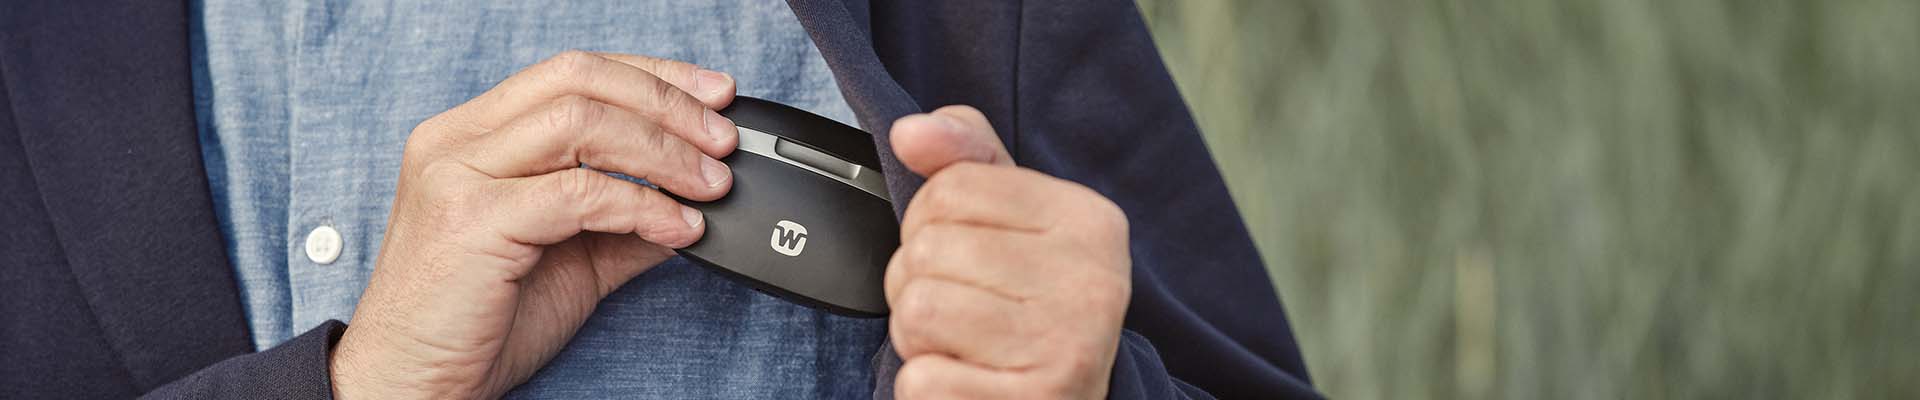 Man putting Widex portable hearing aid charger in his jacket pocket